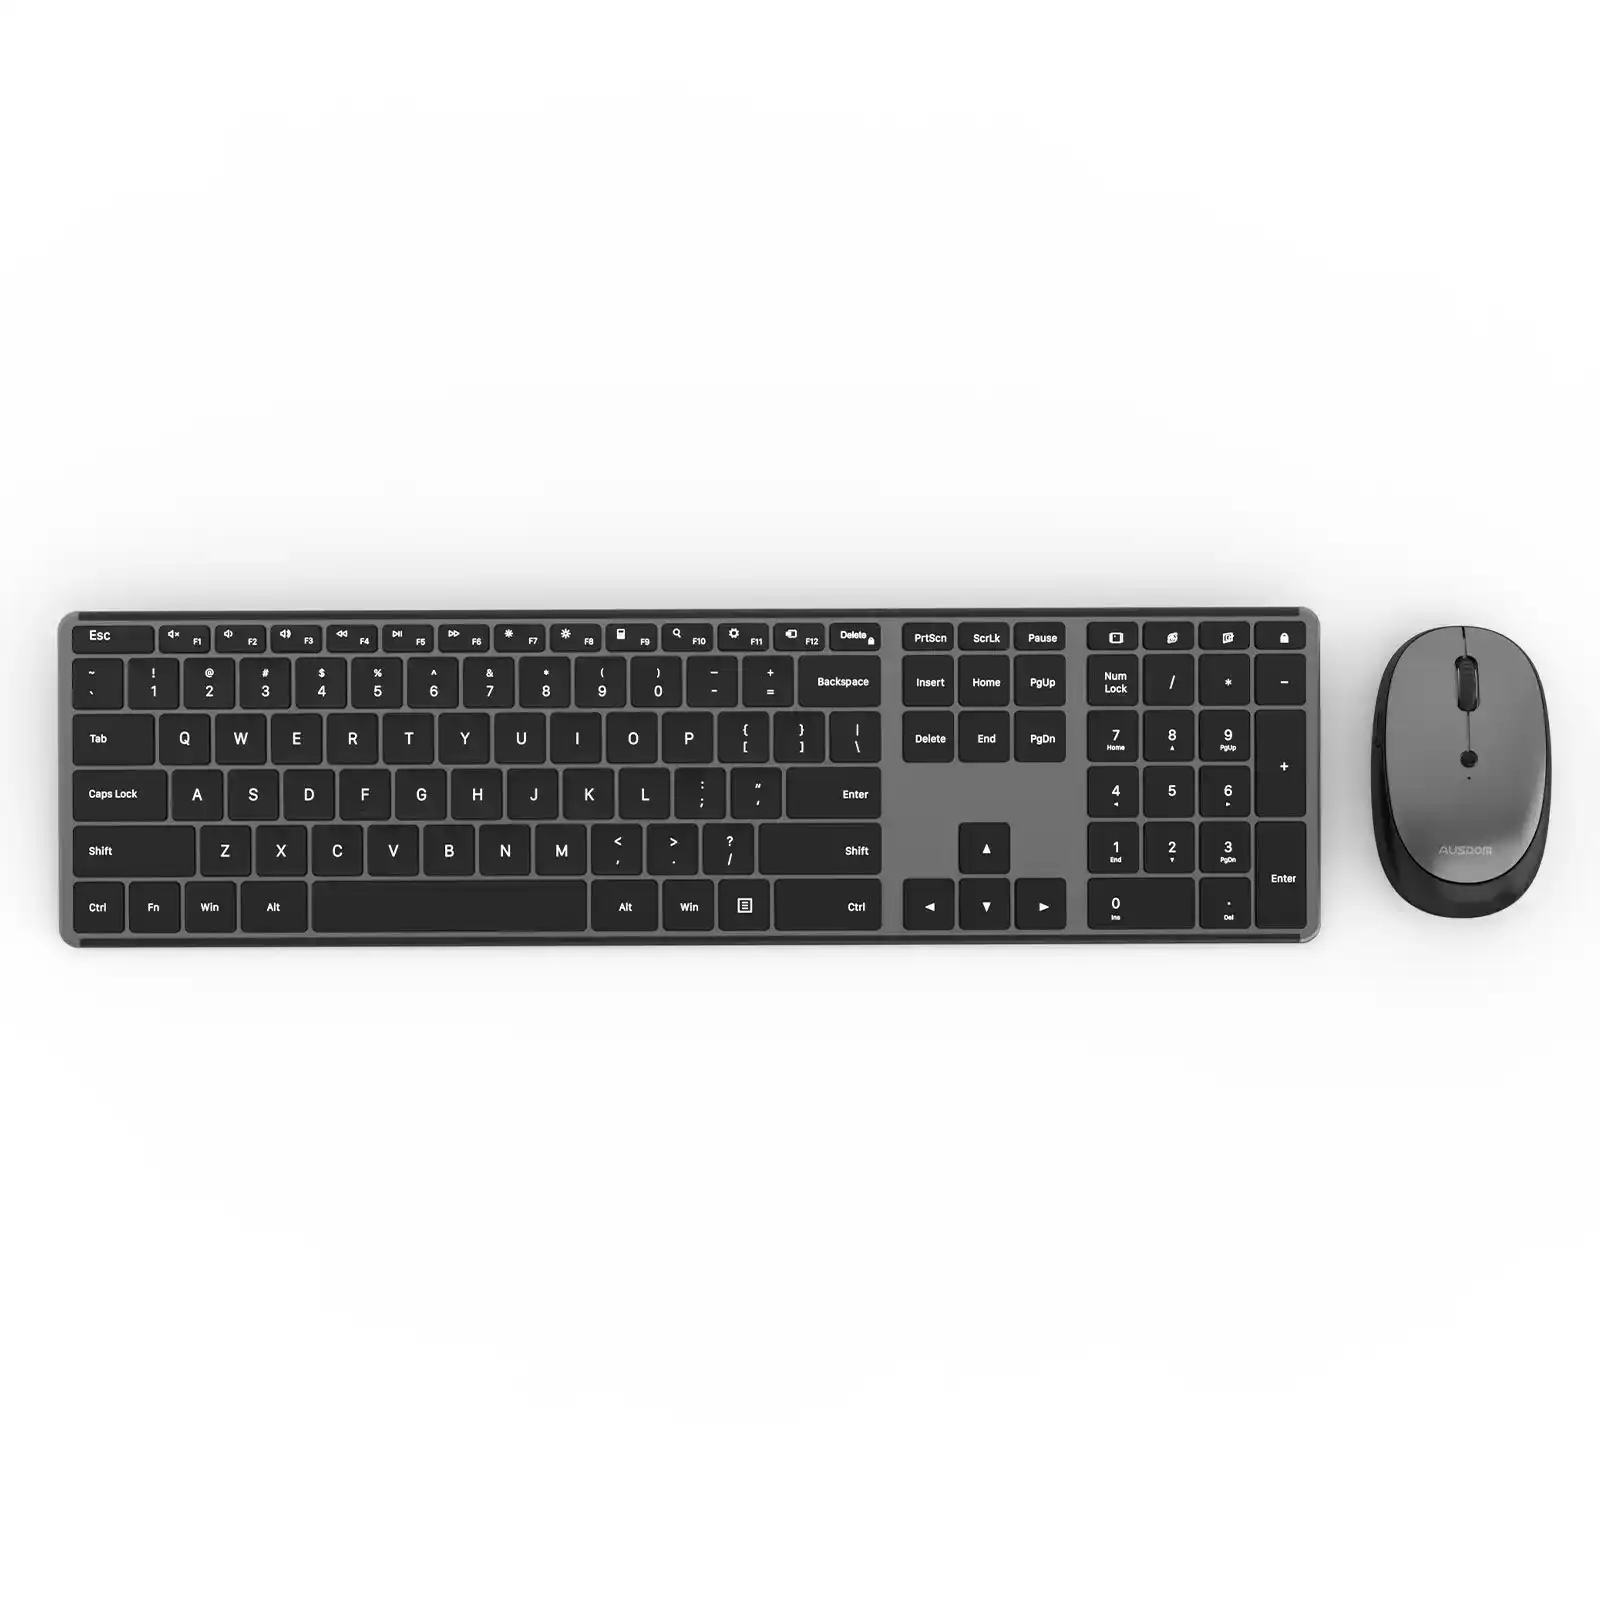 Ausdom KAM200 Wireless Keyboard and Mouse Combo: 2.4Ghz Cordless Silent Keyboard Mouse Set